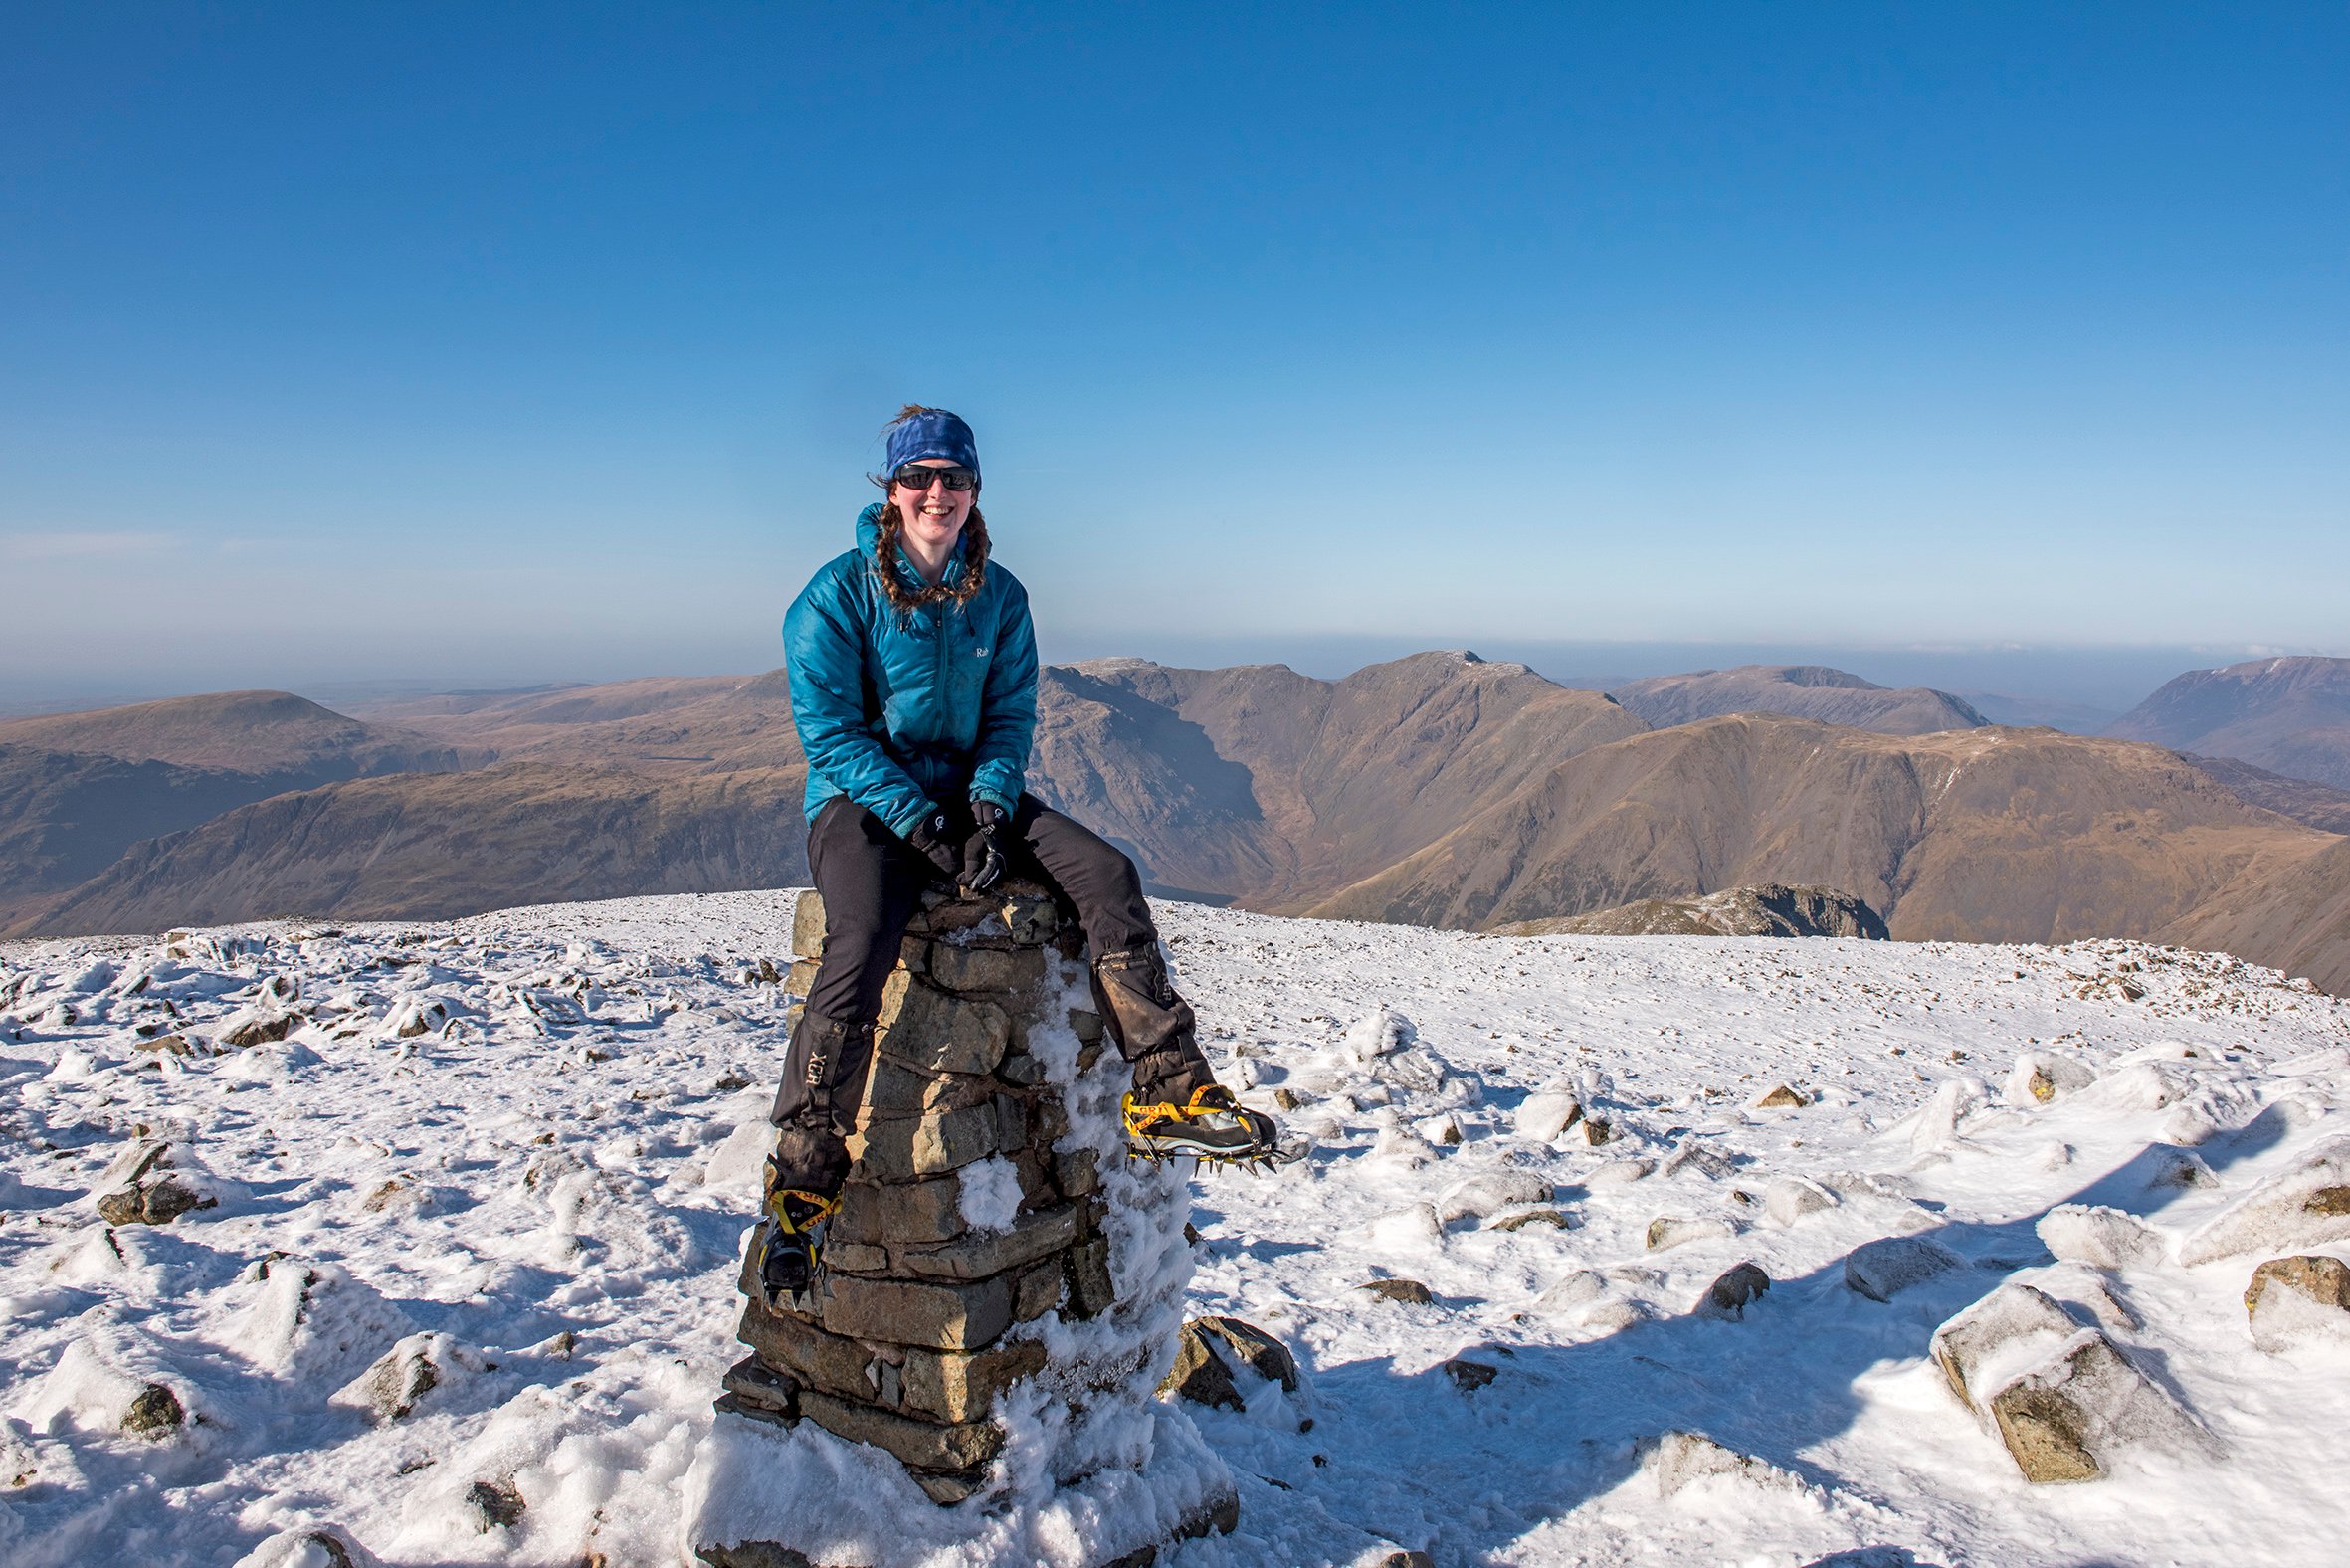 Emily Woodhouse on the snowy summit of Scafell Pike